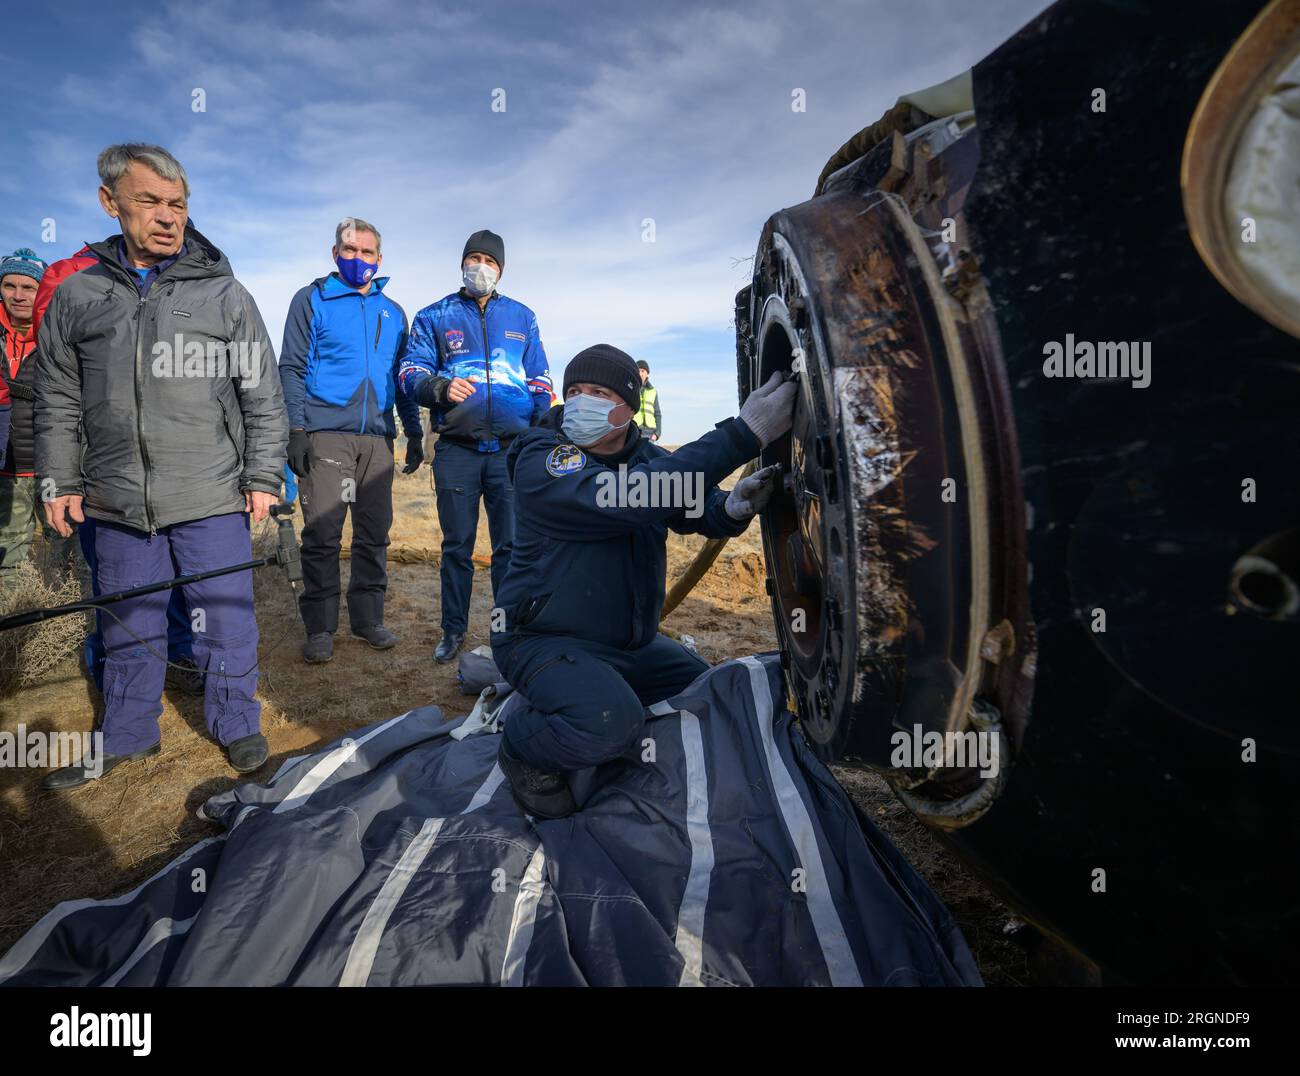 Reportage: Expedition 66 Soyuz Landing (March 2022) - Russian Search and Rescue teams arrive at the Soyuz MS-19 spacecraft shortly after it landed in a remote area near the town of Zhezkazgan, Kazakhstan, March 30, 2022. Stock Photo